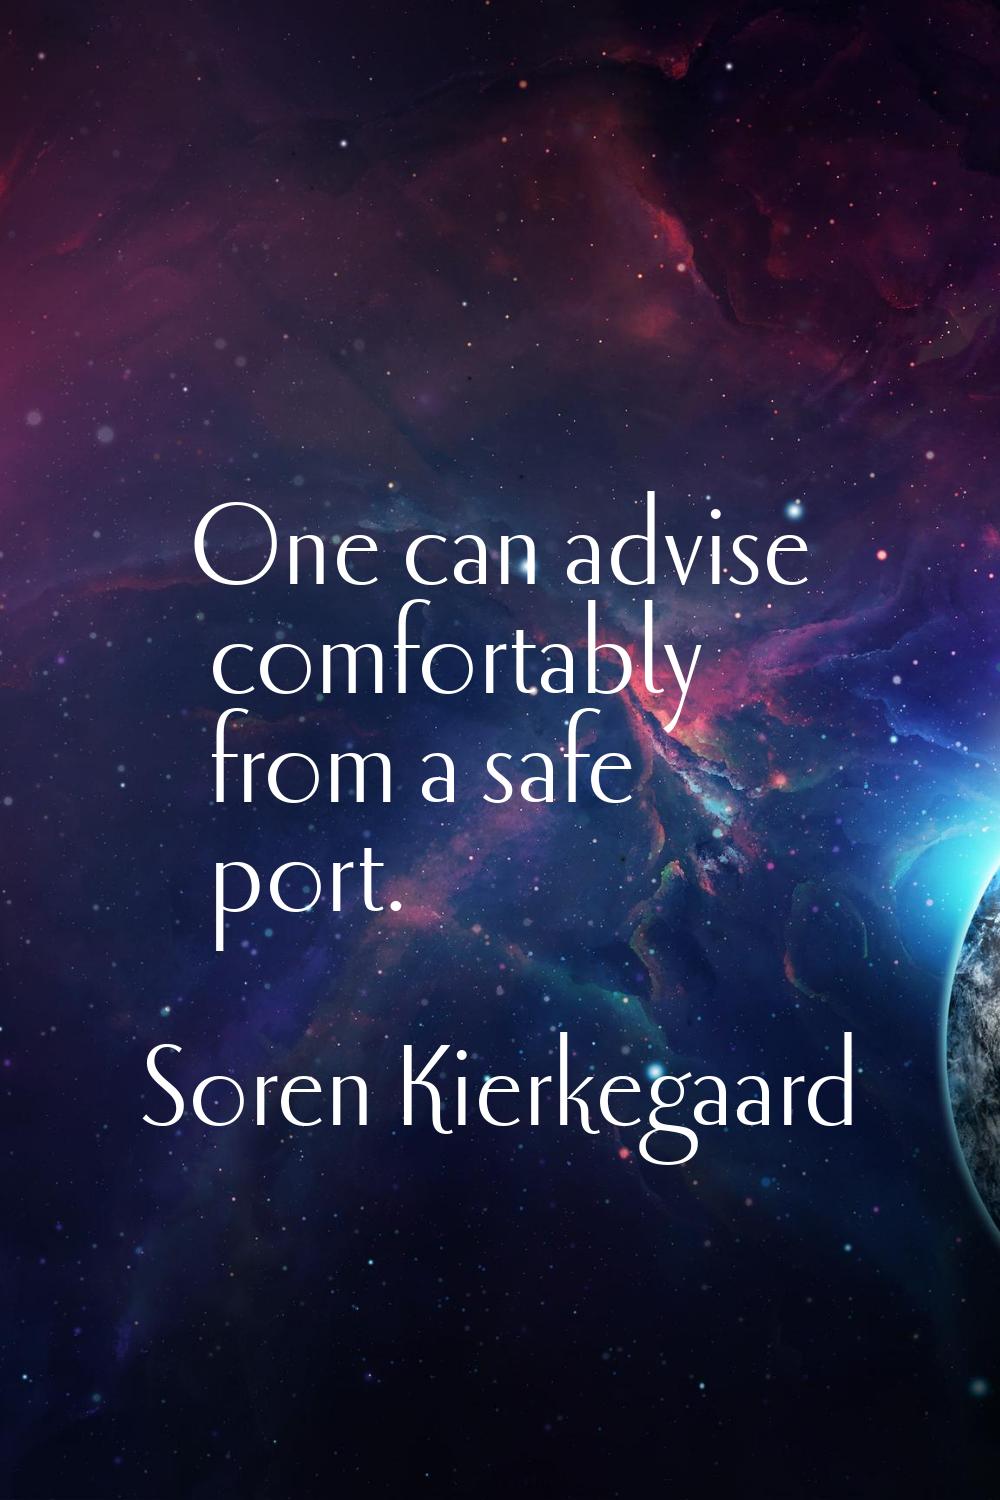 One can advise comfortably from a safe port.